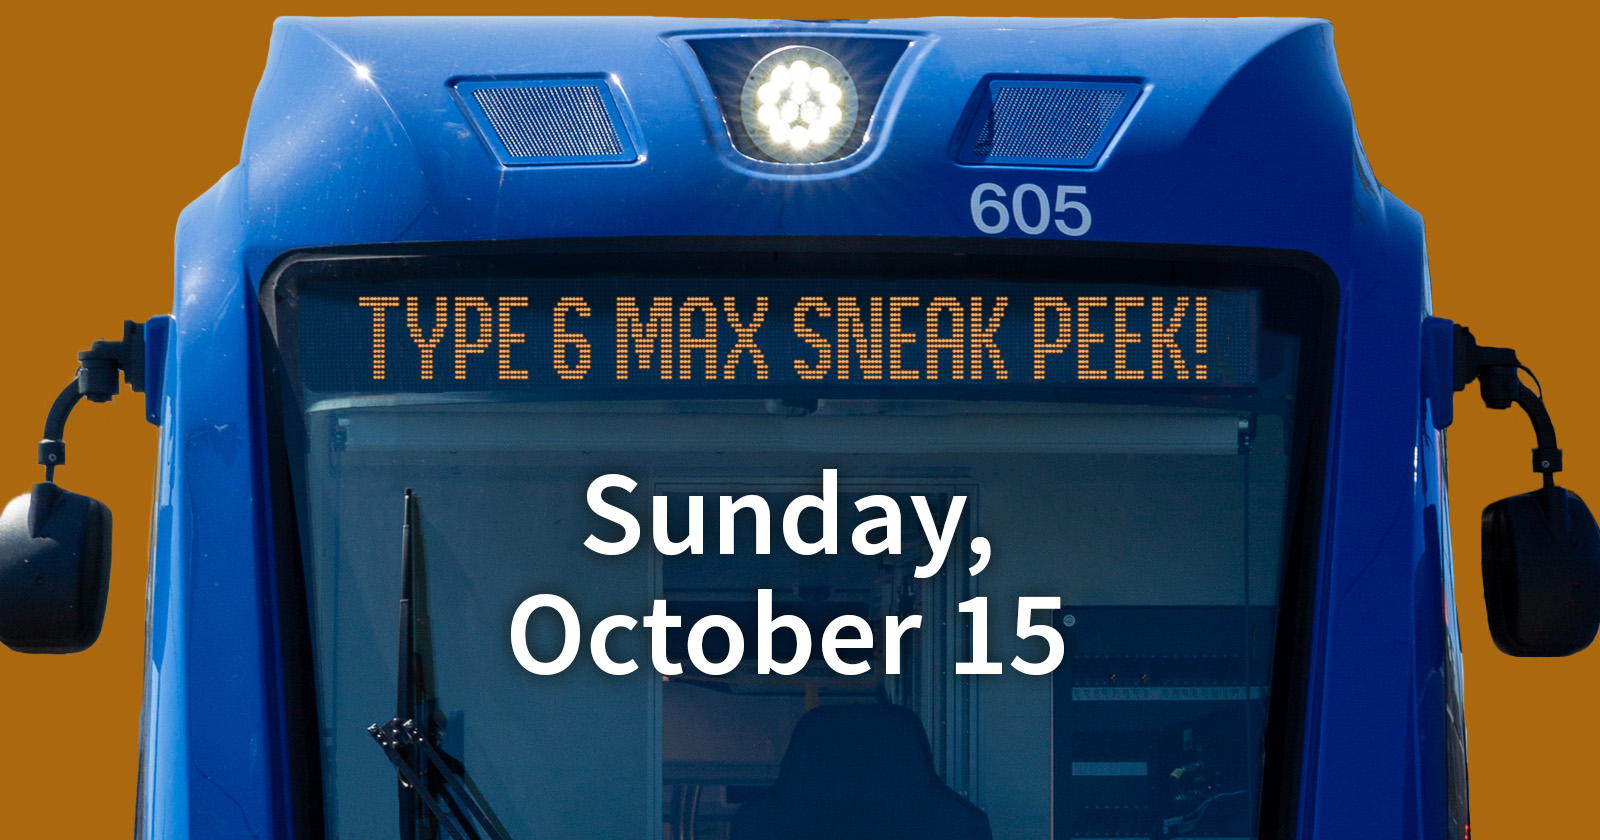 Head-on image of the front of a MAX train with text that reads, "Sunday, October 15"